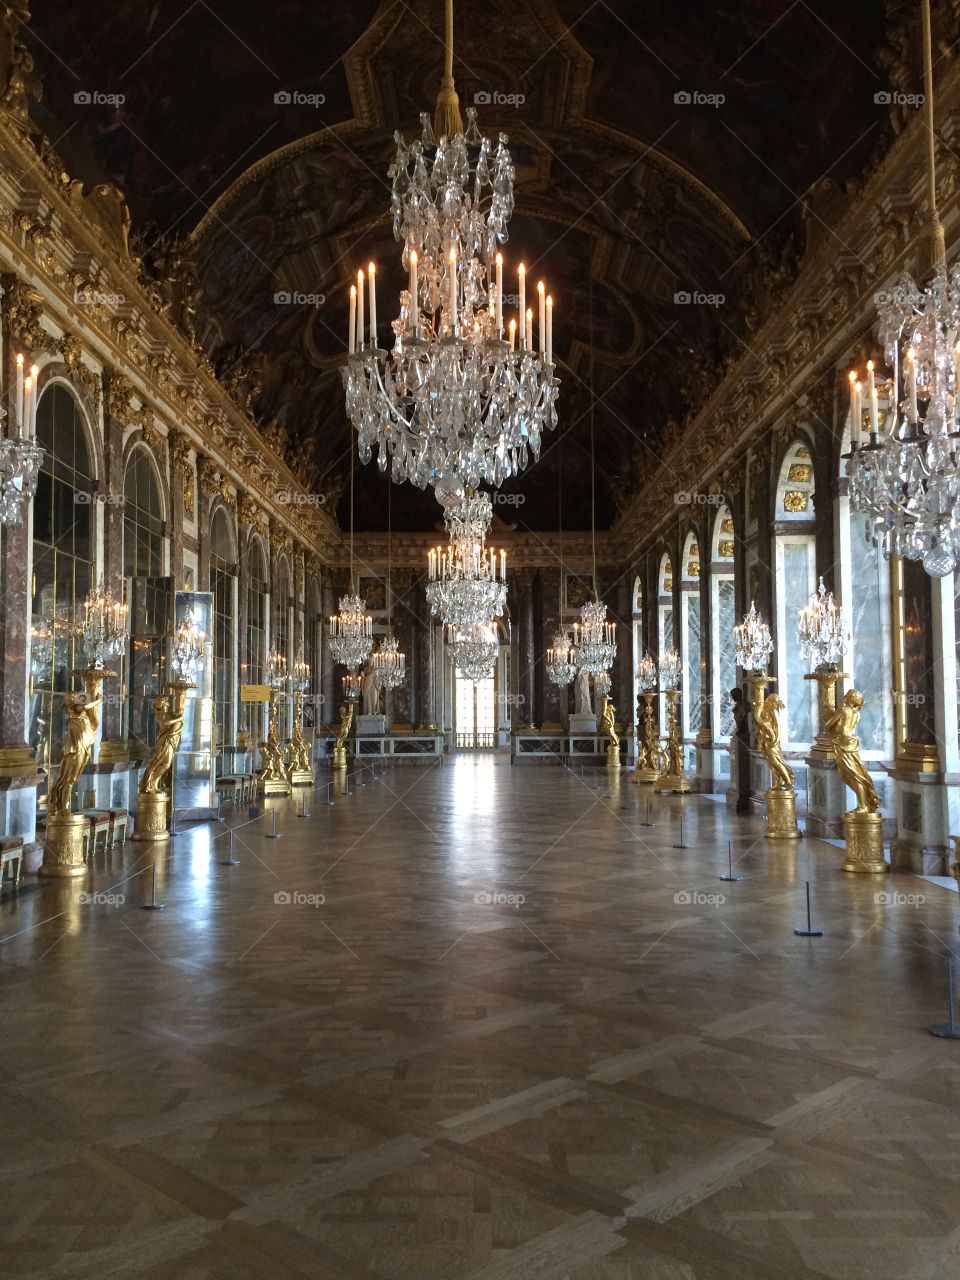 Hall of Mirrors. They don't lie